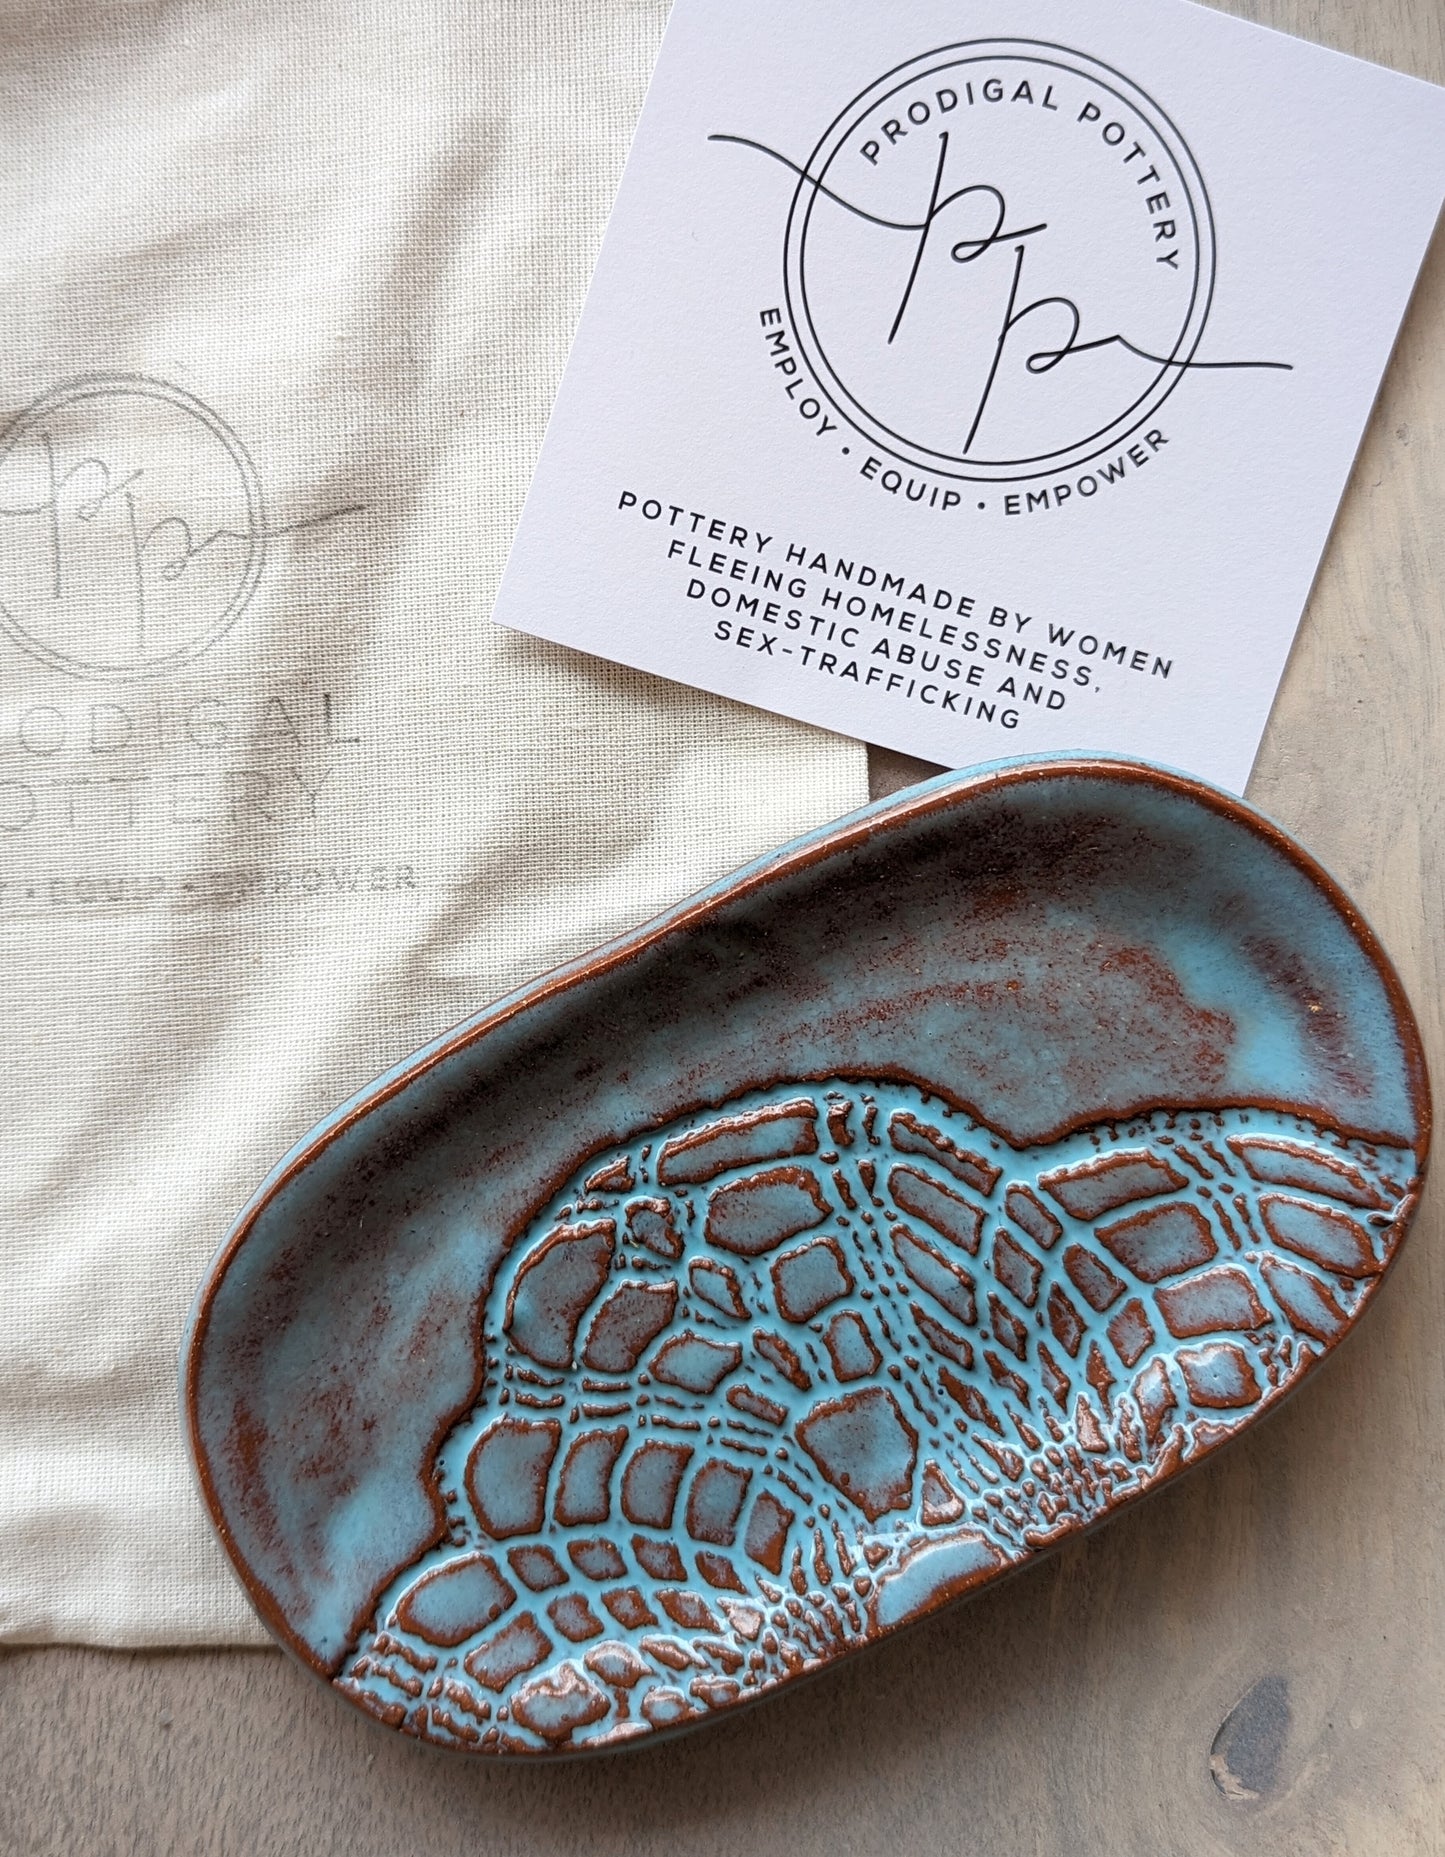 Handcrafted Ceramic Soap Dish by Prodigal Pottery